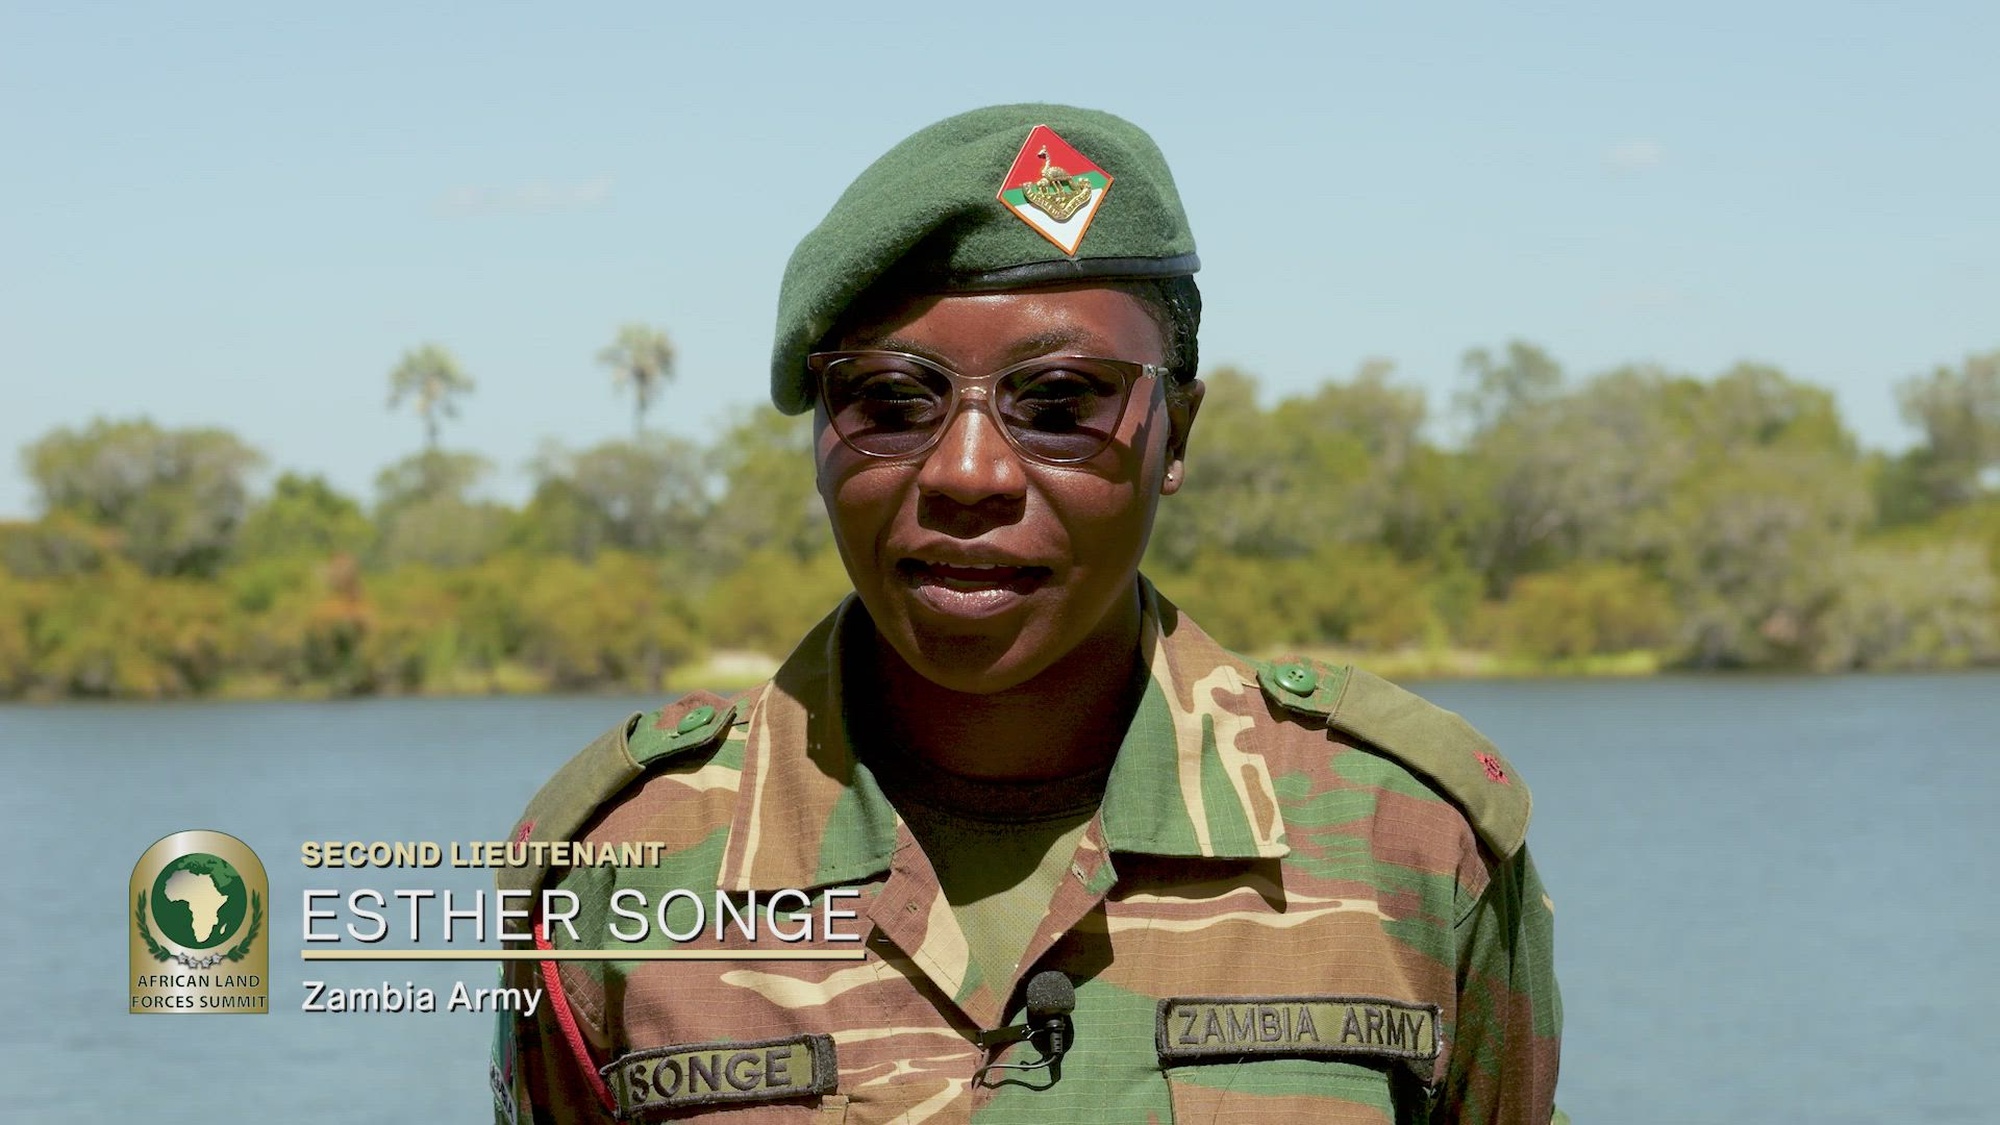 Zambian Army 2nd Lt. Esther Songe, public relations and protocol officer, sends a welcome greeting to this year's African Land Forces Summit (ALFS) participants.  ALFS 2024 is being held in Zambia, under the theme of “Regional solutions to transnational problems.” Sponsored by the U.S. Army Chief of Staff and co-hosted by the U.S. Army Southern European Task Force, Africa (SETAF-AF) and the Zambian Defense Force, ALFS 2024 brings together senior leaders from across Africa and other partner nations, April 22-26 in Livingstone, Zambia, to solidify relationships, exchange information on current topics of mutual interest and encourage cooperation in addressing challenges. (Courtesy asset from Zambia Army Public Affairs Office)